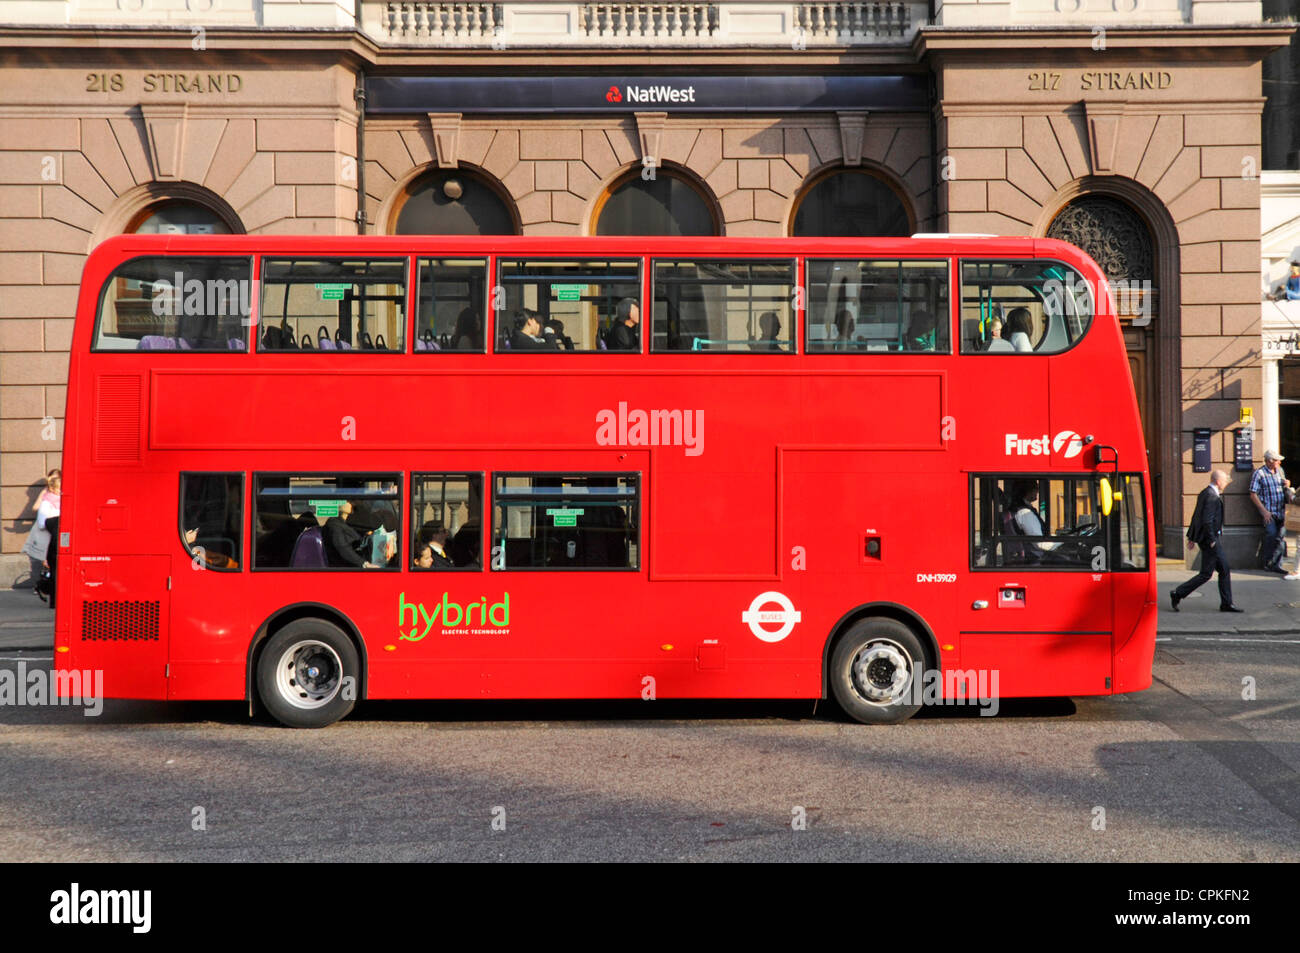 Hybrid London bus outside Nat West bank branch in The Strand Stock Photo